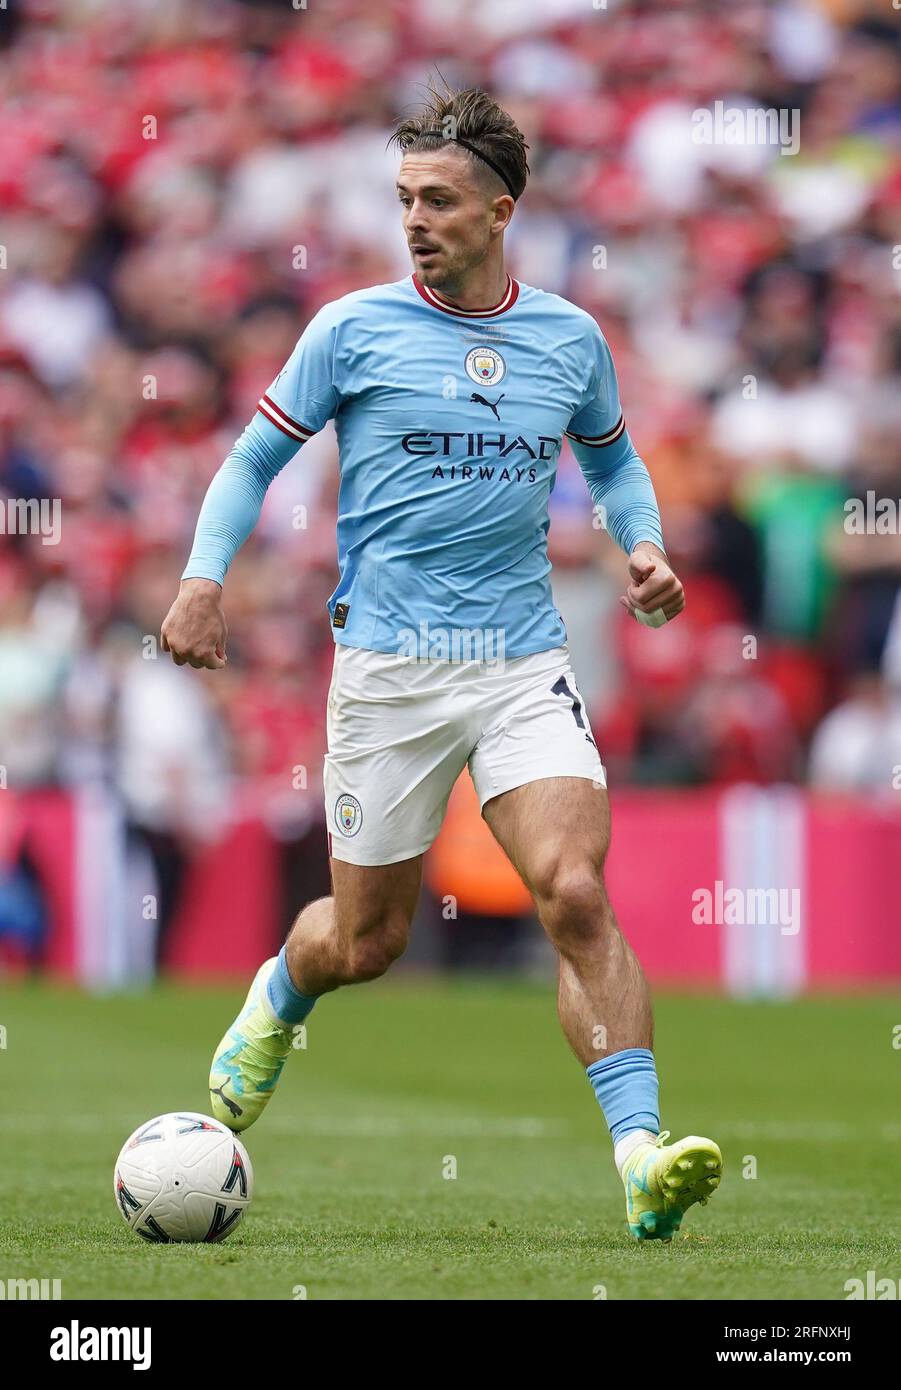 Manchester City's Jack Grealish during the Emirates FA Cup final at Wembley Stadium, London. Picture date: Saturday June 3, 2023. See PA Story SOCCER Final. Photo credit should read: Nick Potts/PA Wire. RESTRICTIONS: EDITORIAL USE ONLY No use with unauthorised audio, video, data, fixture lists, club/league logos or 'live' services. Online in-match use limited to 120 images, no video emulation. No use in betting, games or single club/league/player publications. Stock Photo